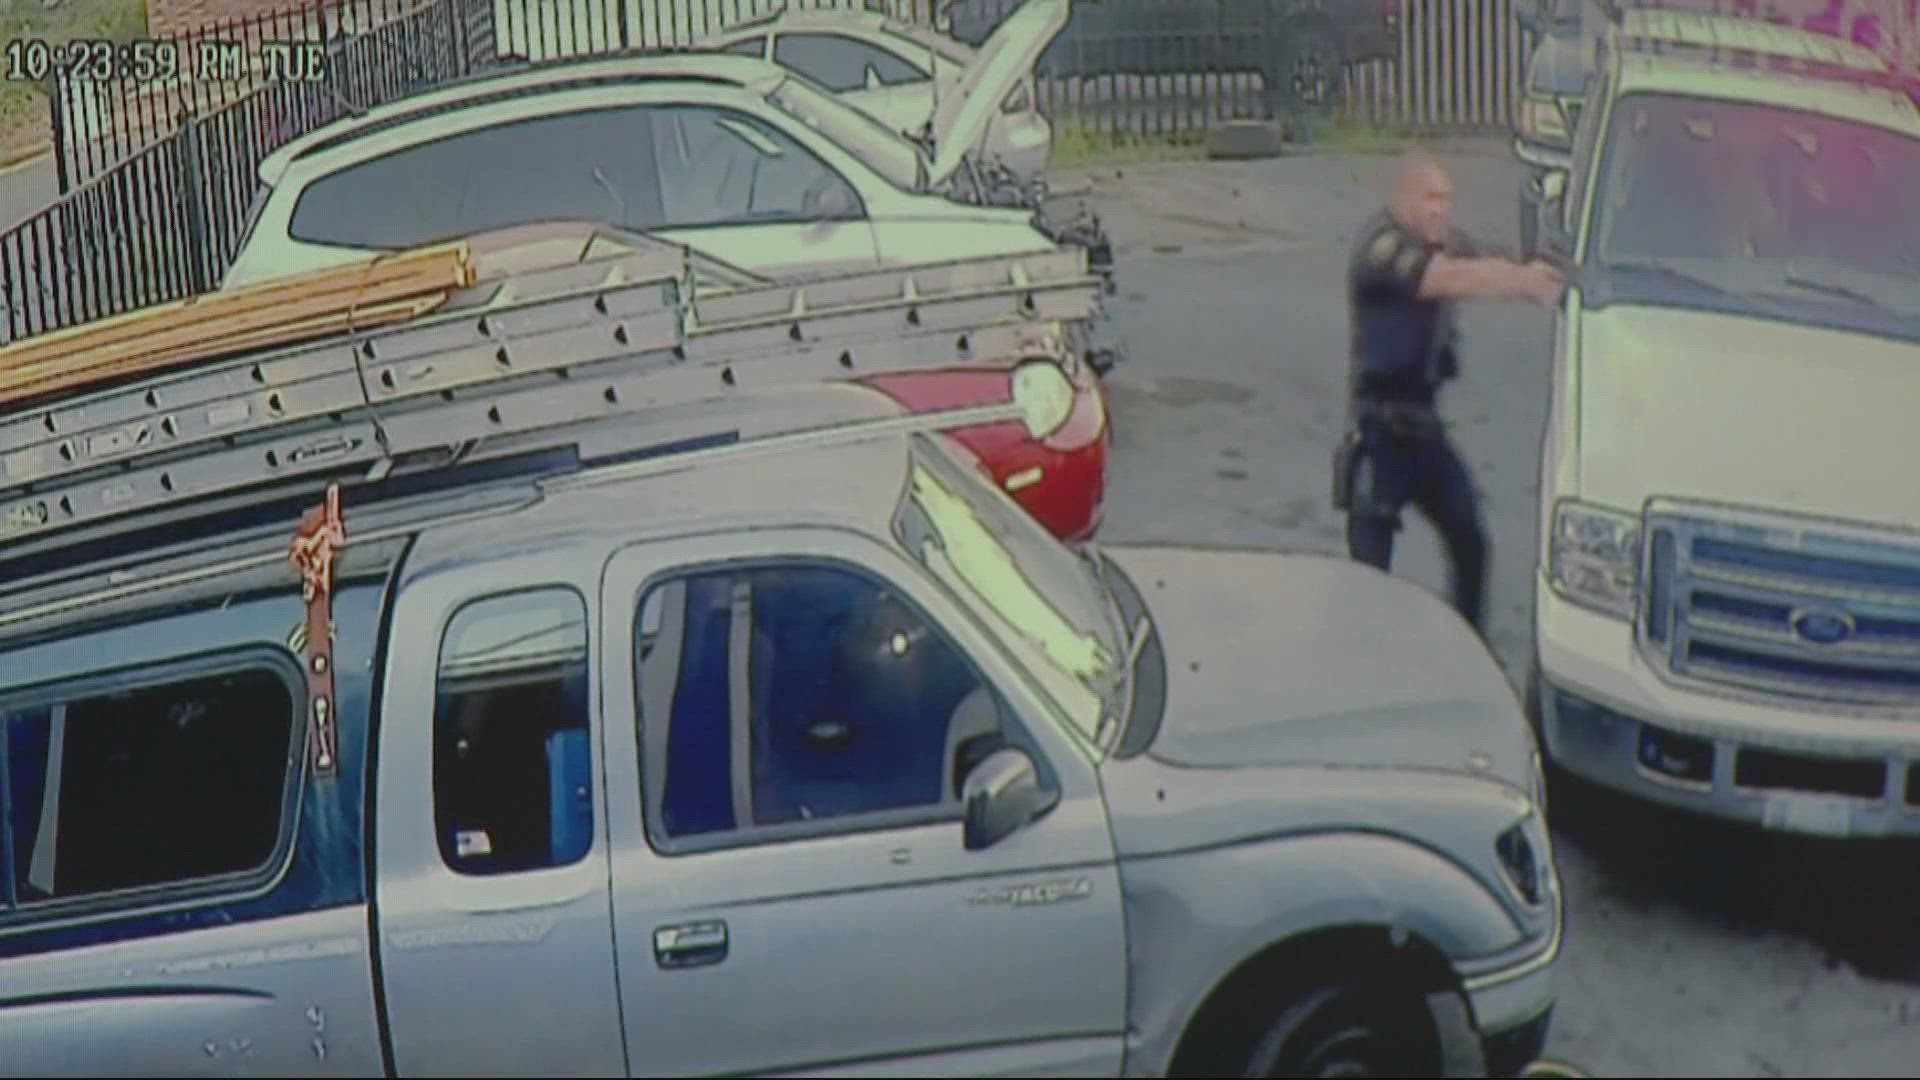 Wanted man pulls gun and takes a man hostage at a nearby auto shop in Southeast Portland.